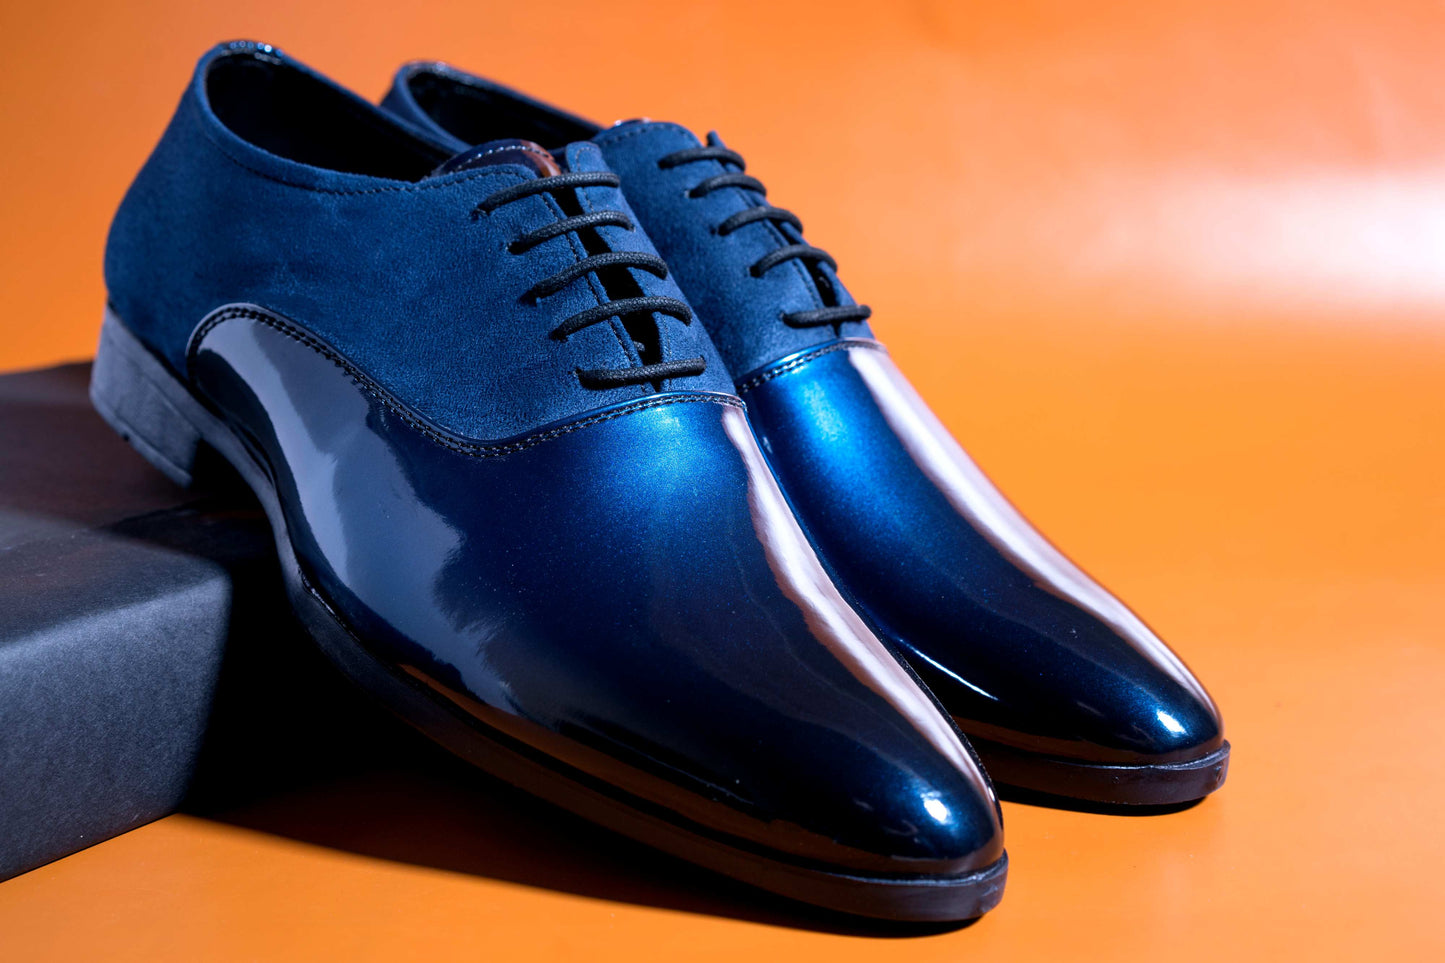 New Fashion Elegant And Classy Shiny Blue Formal Suede Shoes For Men-JonasParamount